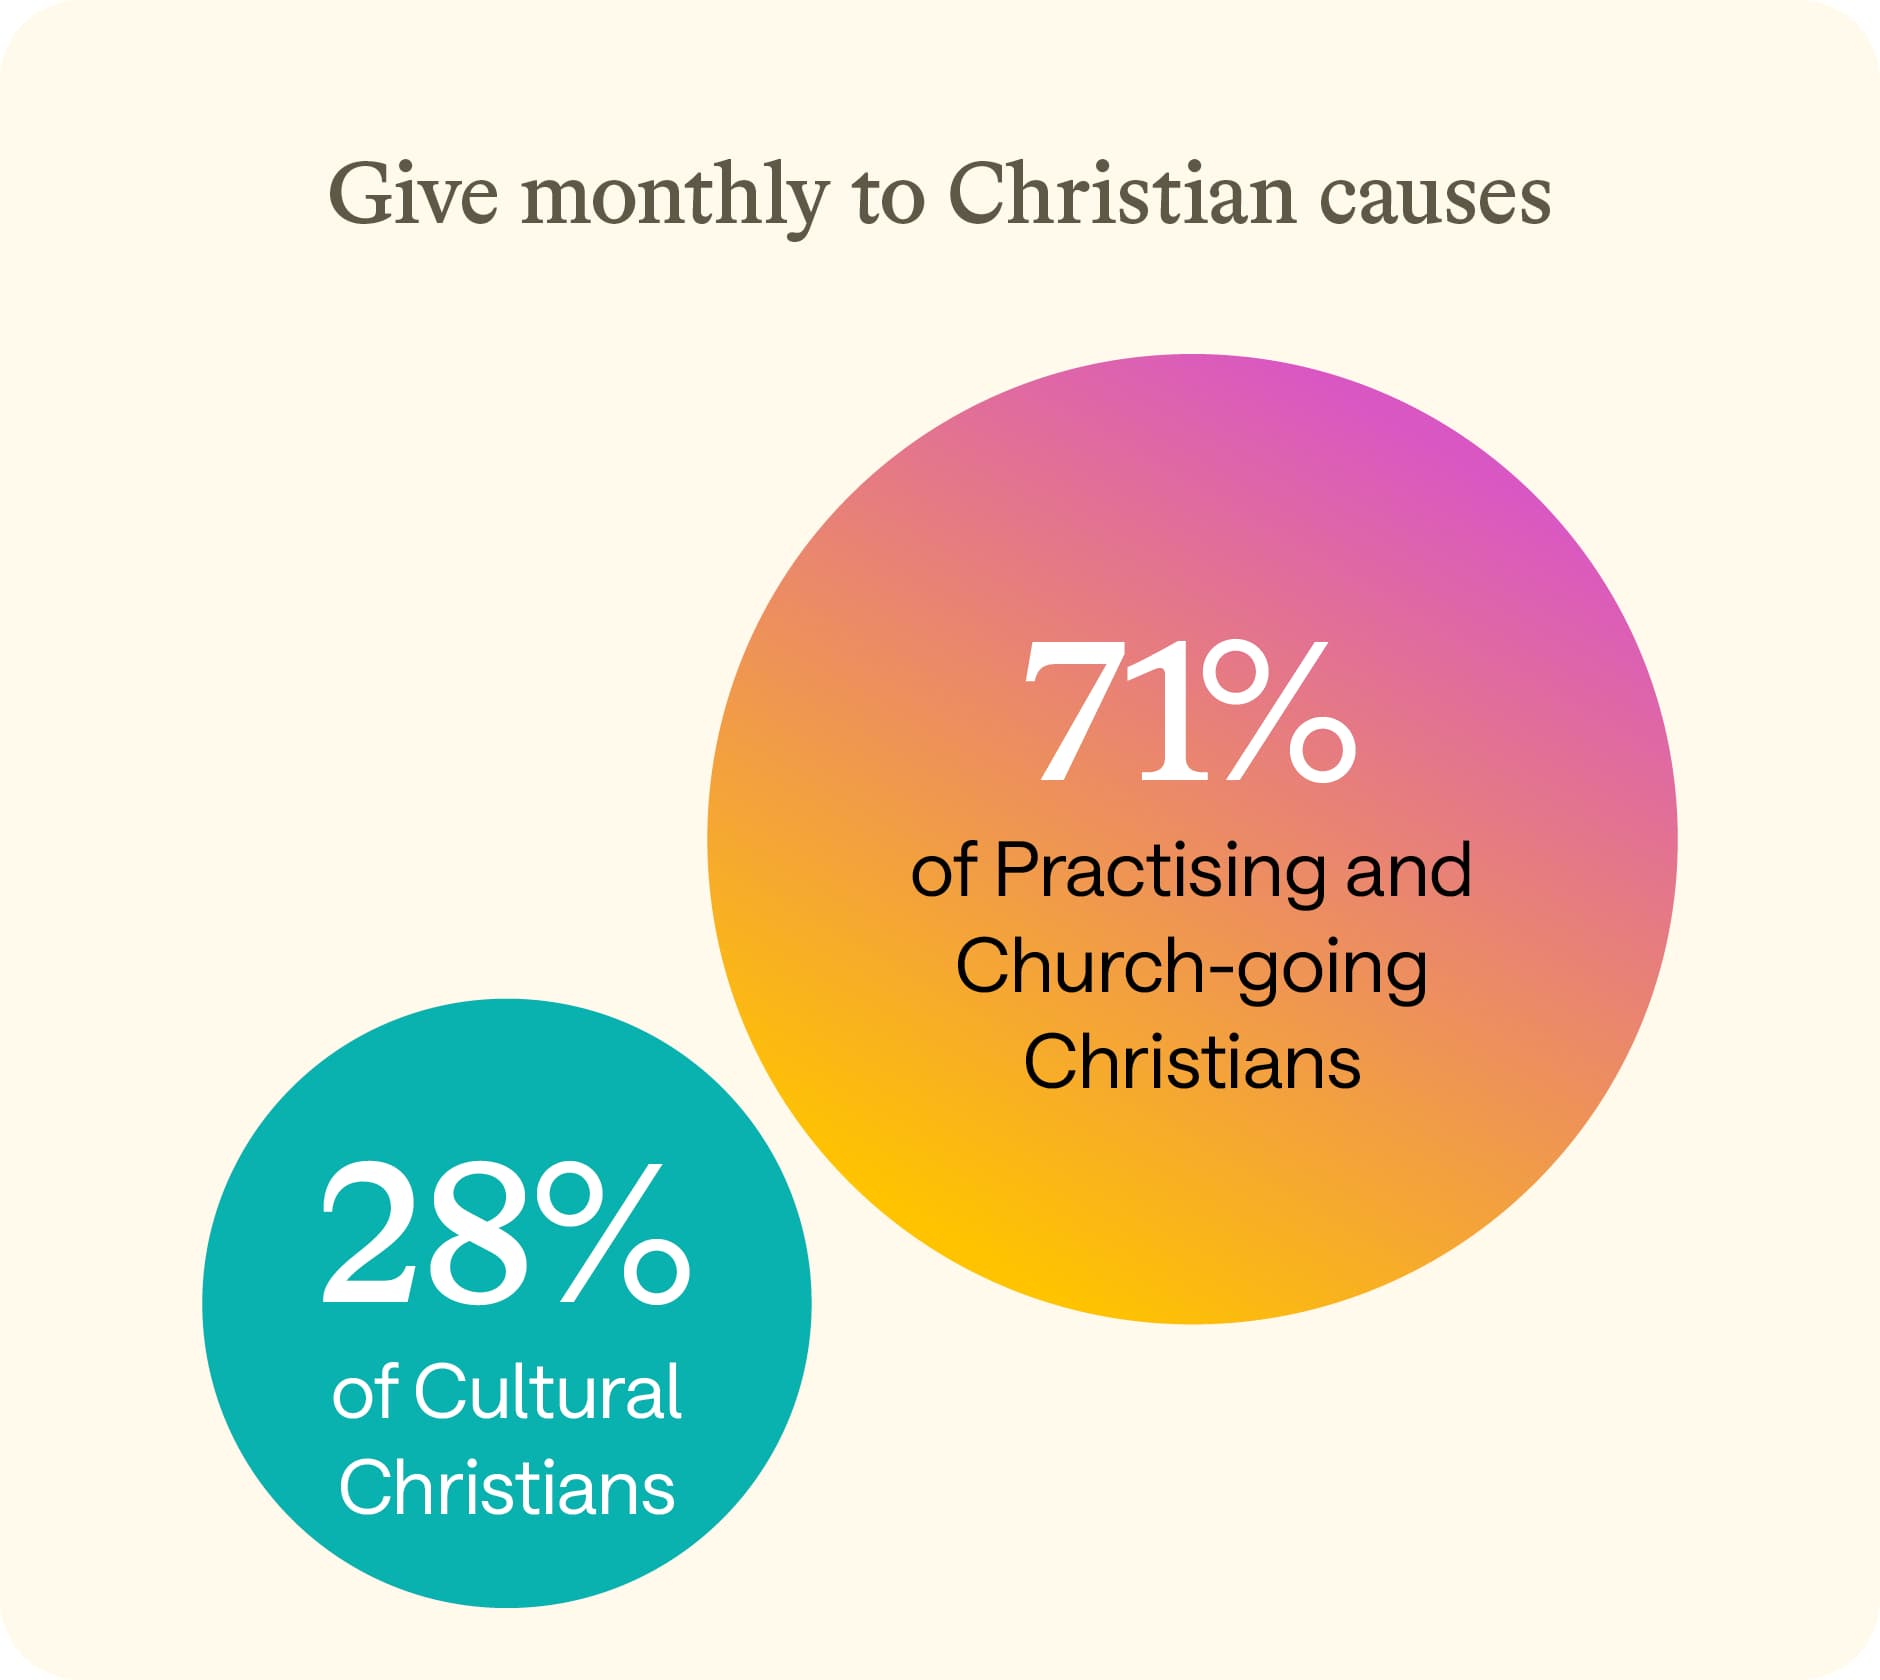 Graph to show percentage of monthly giving by different Christian segments